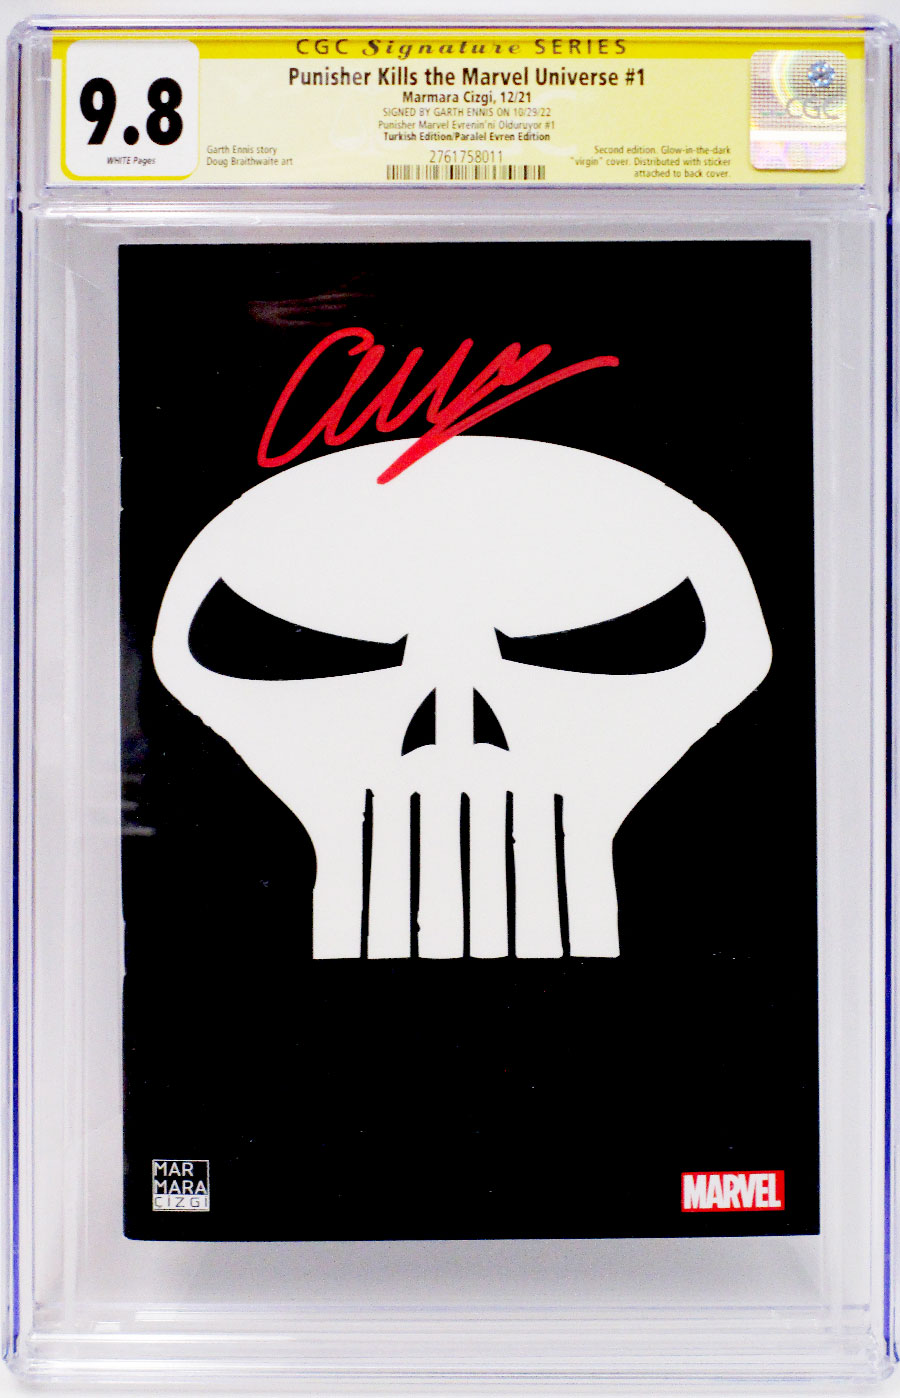 Punisher Kills The Marvel Universe #1 Cover G Signed by Garth Ennis Turkish Edition Paralel Evren Edition CGC Signature Series 9.8